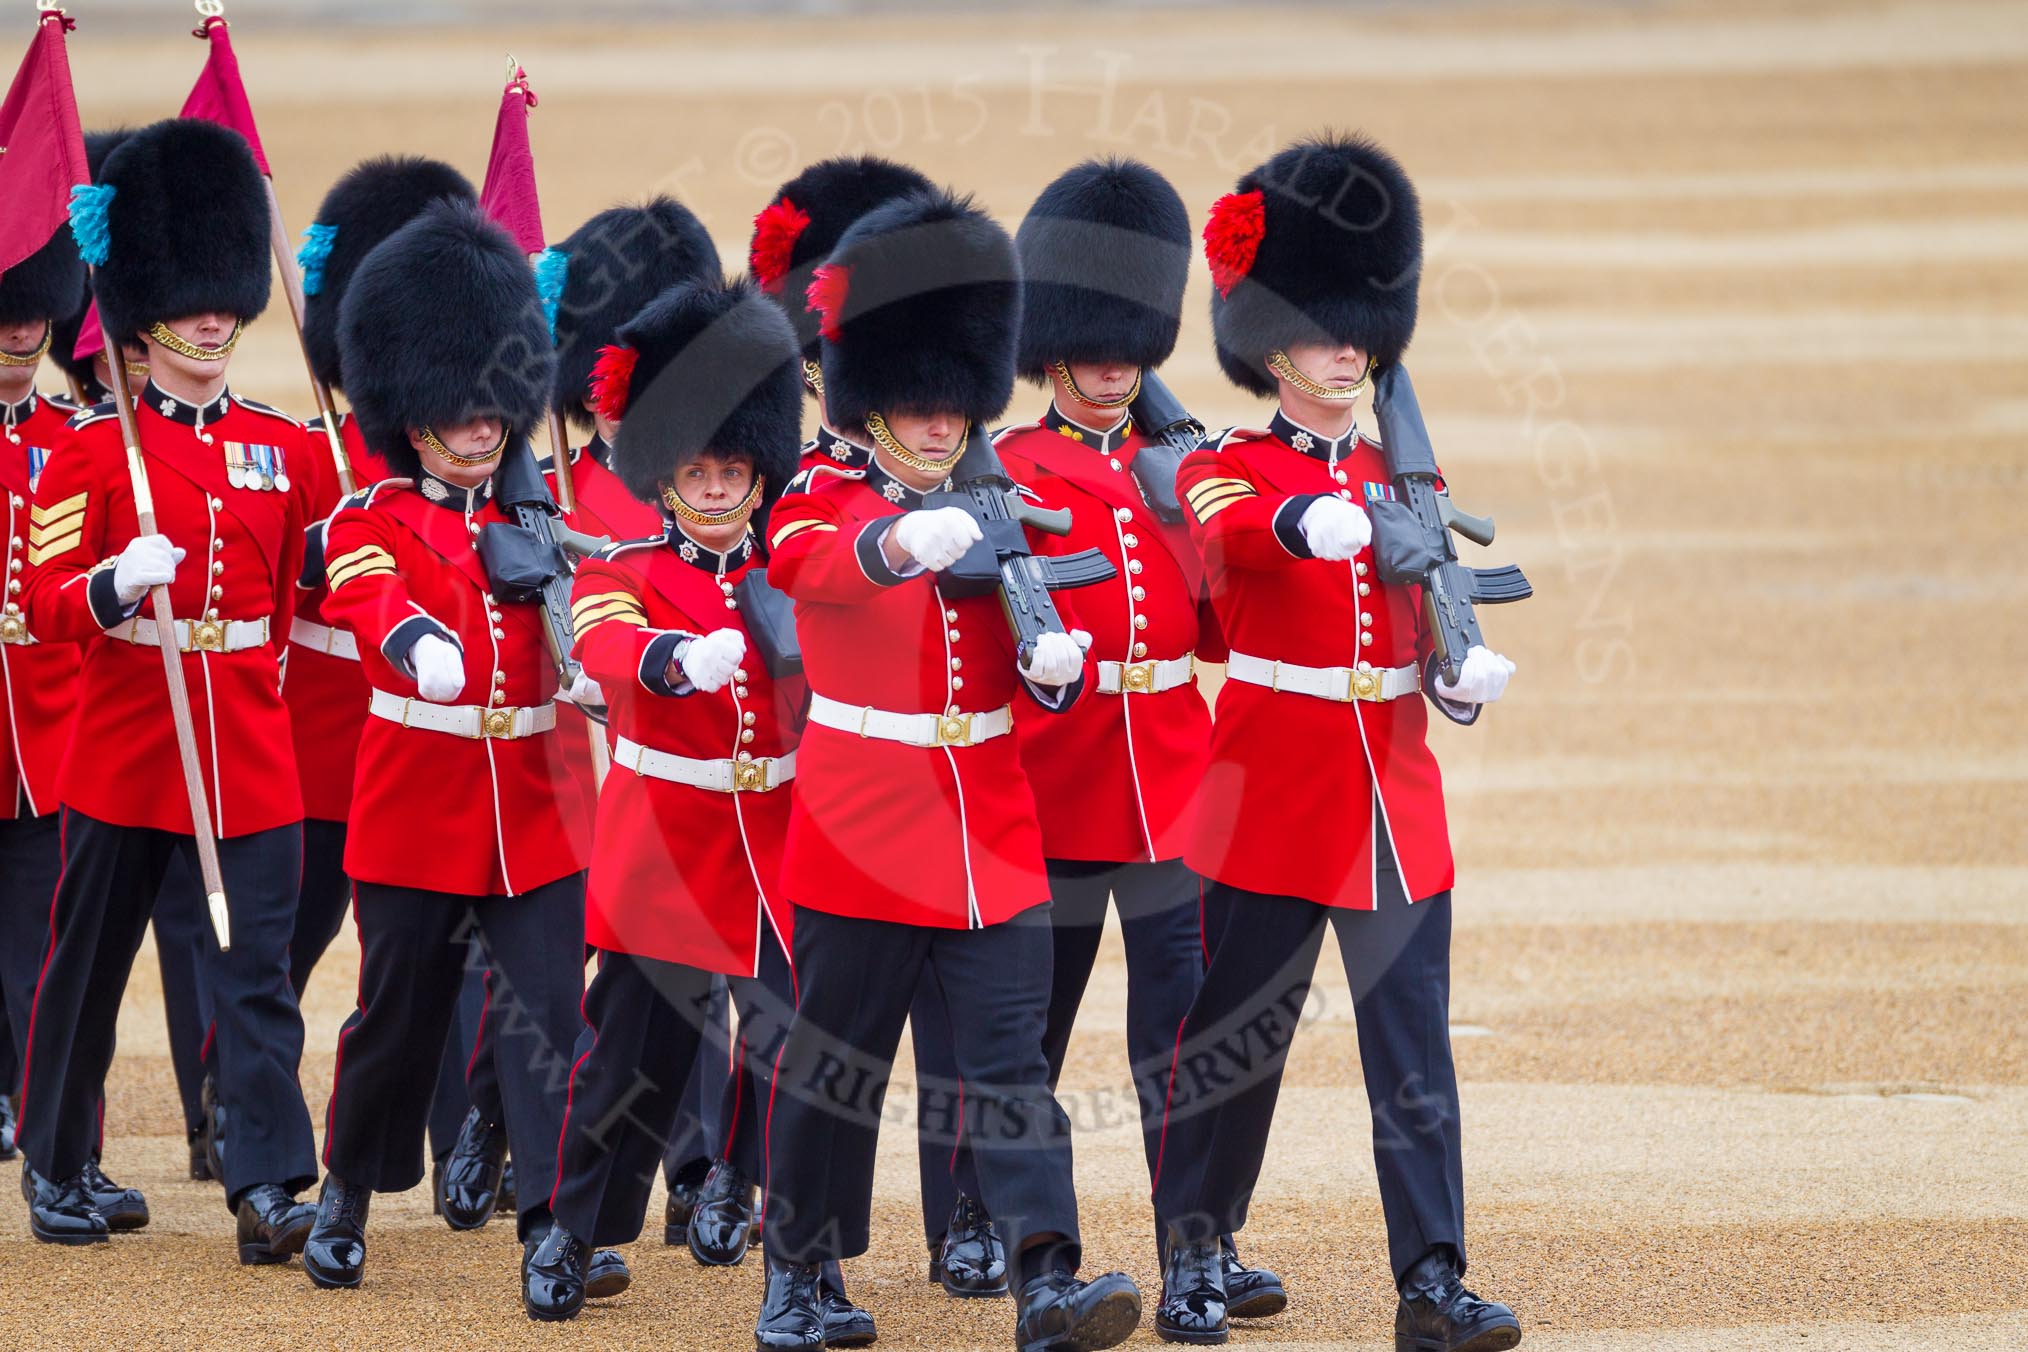 The Colonel's Review 2016.
Horse Guards Parade, Westminster,
London,

United Kingdom,
on 04 June 2016 at 09:53, image #18